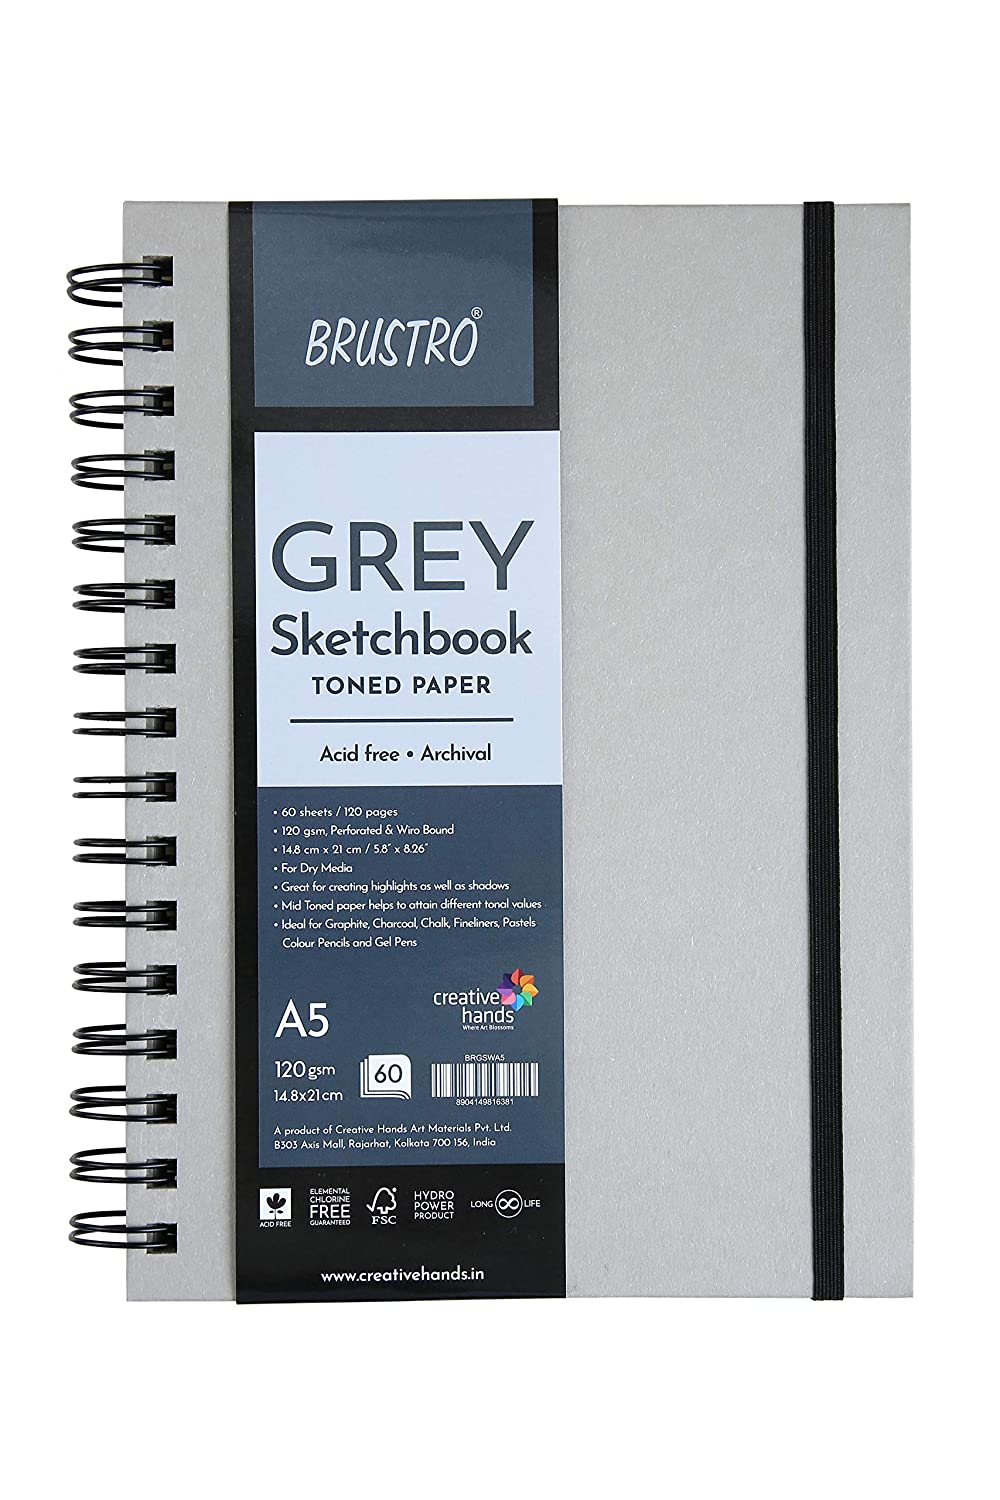 Brustro Toned Paper - Grey Sketchbook, Wiro Bound, Size A5 120GSM (60 Sheets) 120 Pages